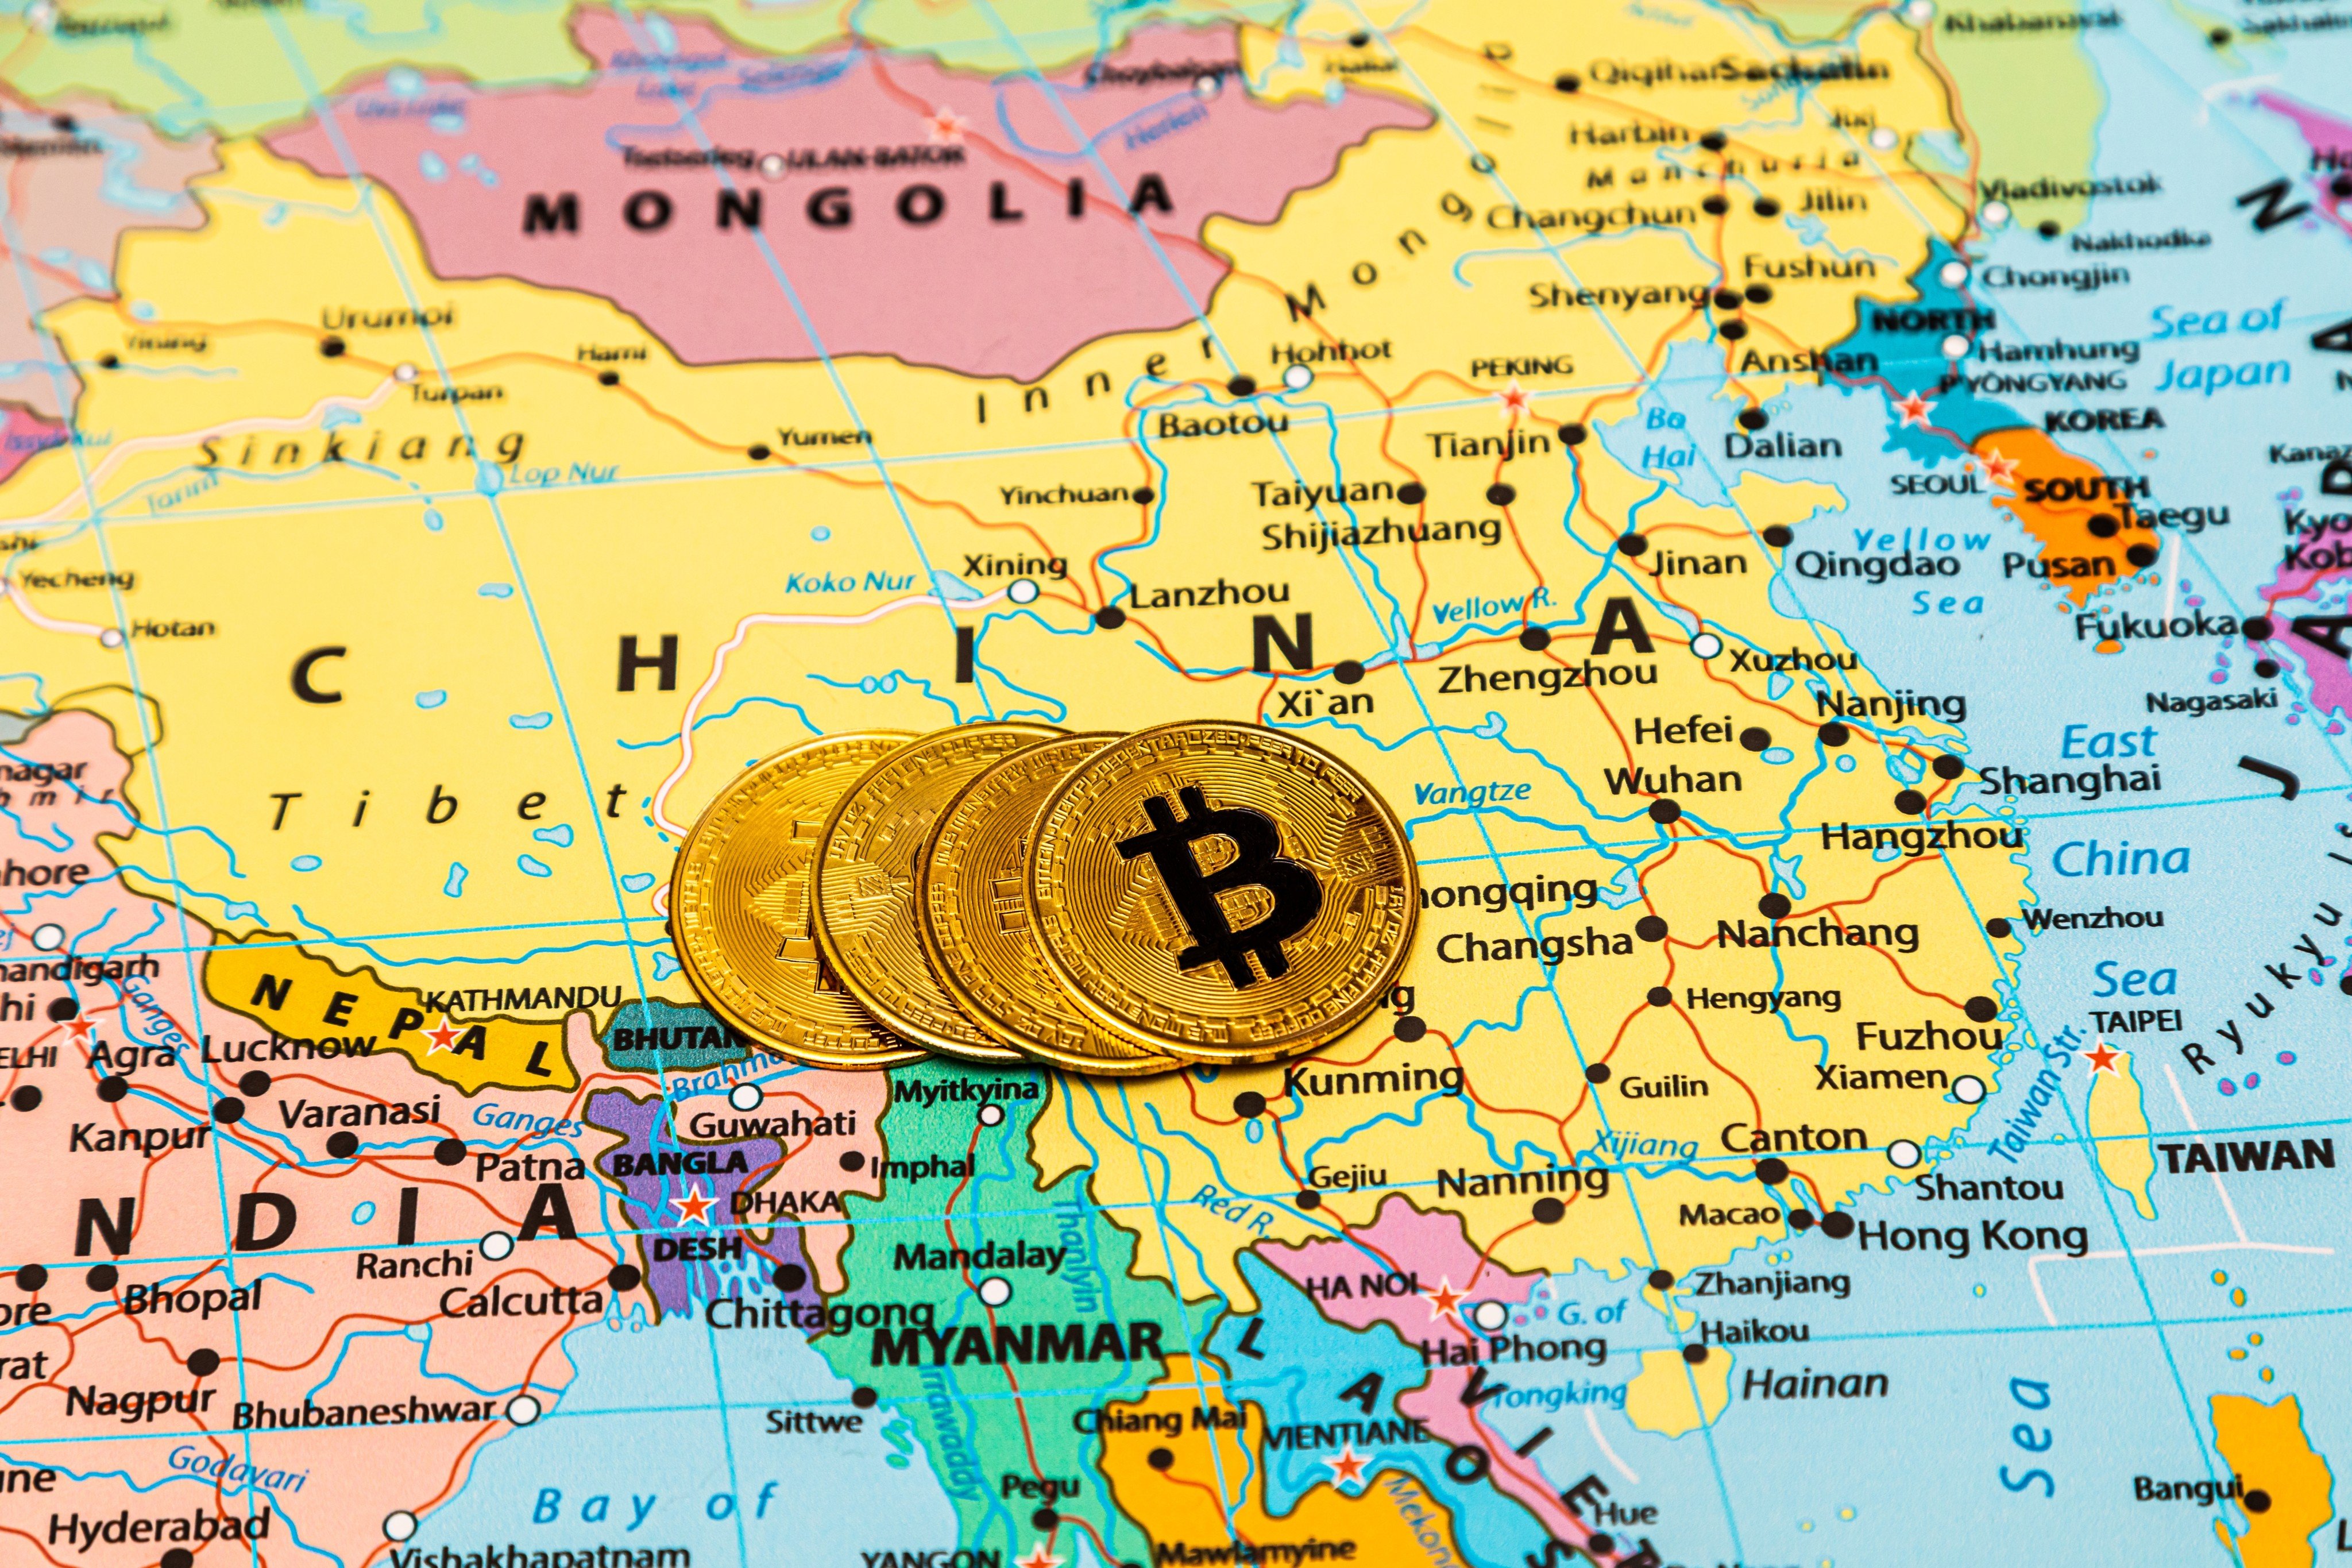 After banning initial coin offerings and ordering the closure of exchanges in 2017, the Chinese government went even further by banning bitcoin mining in 2021. Photo: Shutterstock Images